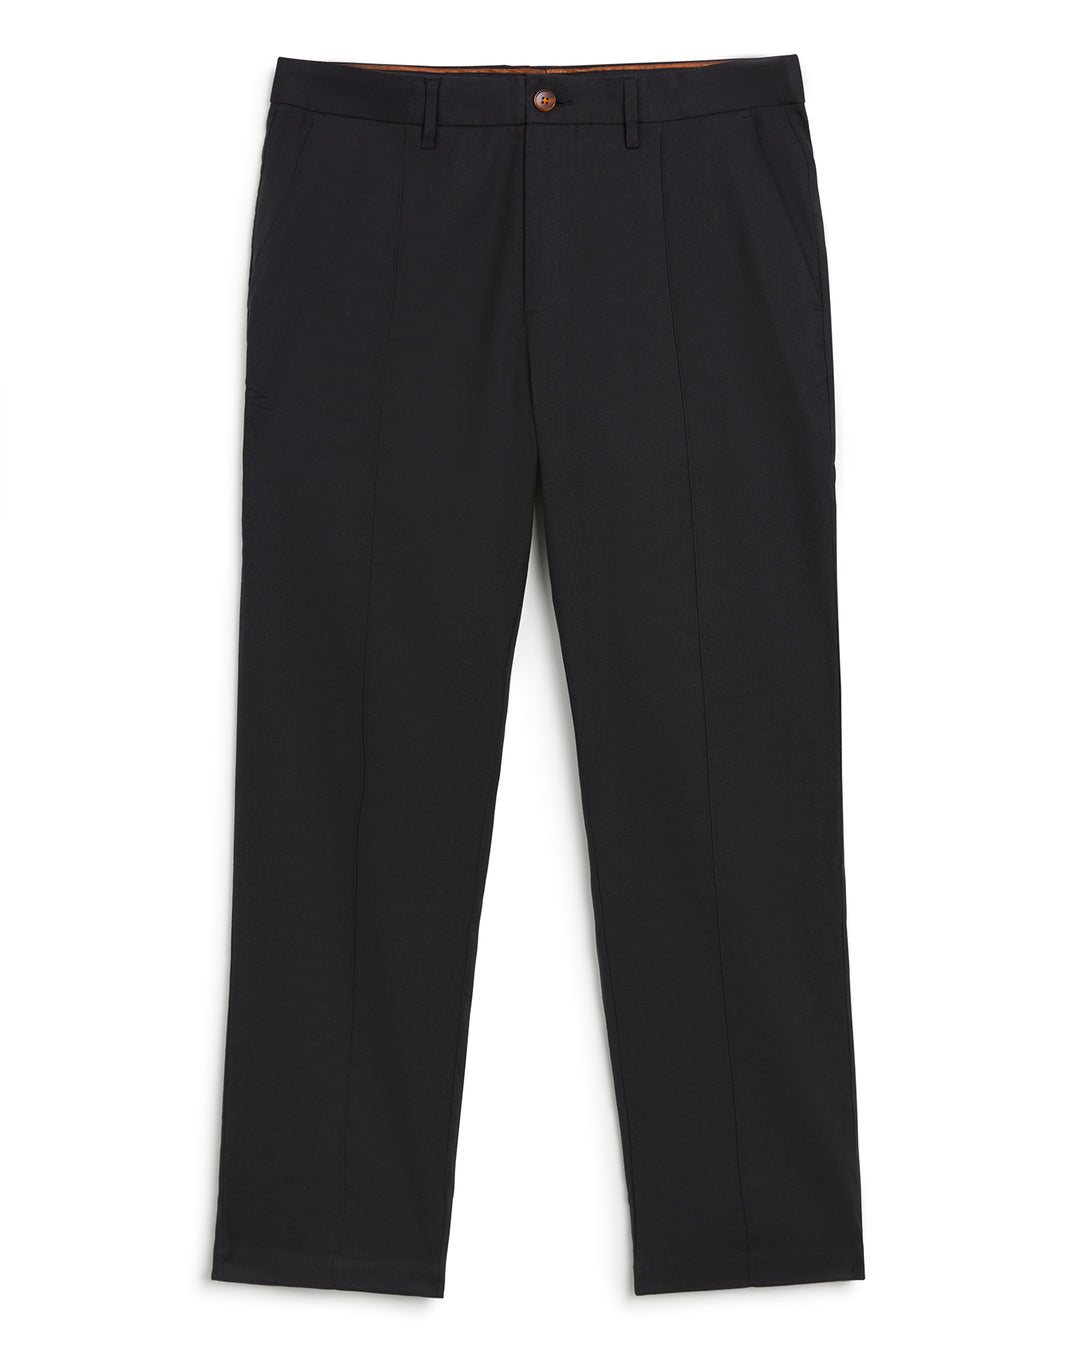 A tailored fit men's Brisa Linen Trouser - Onyx with light linens by Dandy Del Mar.